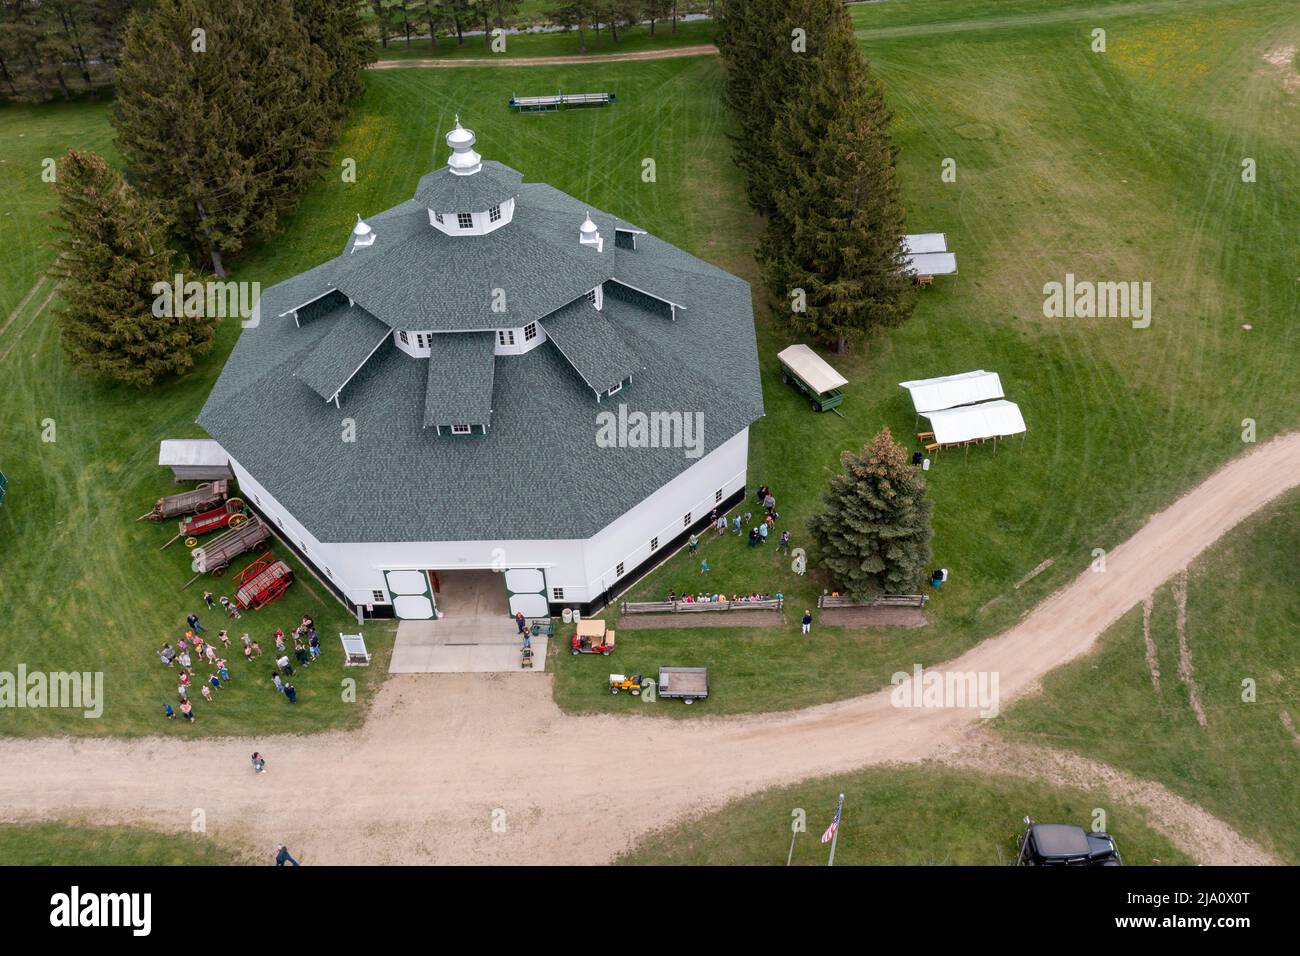 Gagetown, Michigan - The Thumb Octagon Barn in Michigan's Thumb region. The rare eight-sided barn was built in 1923. It is now an agricultural museum. Stock Photo